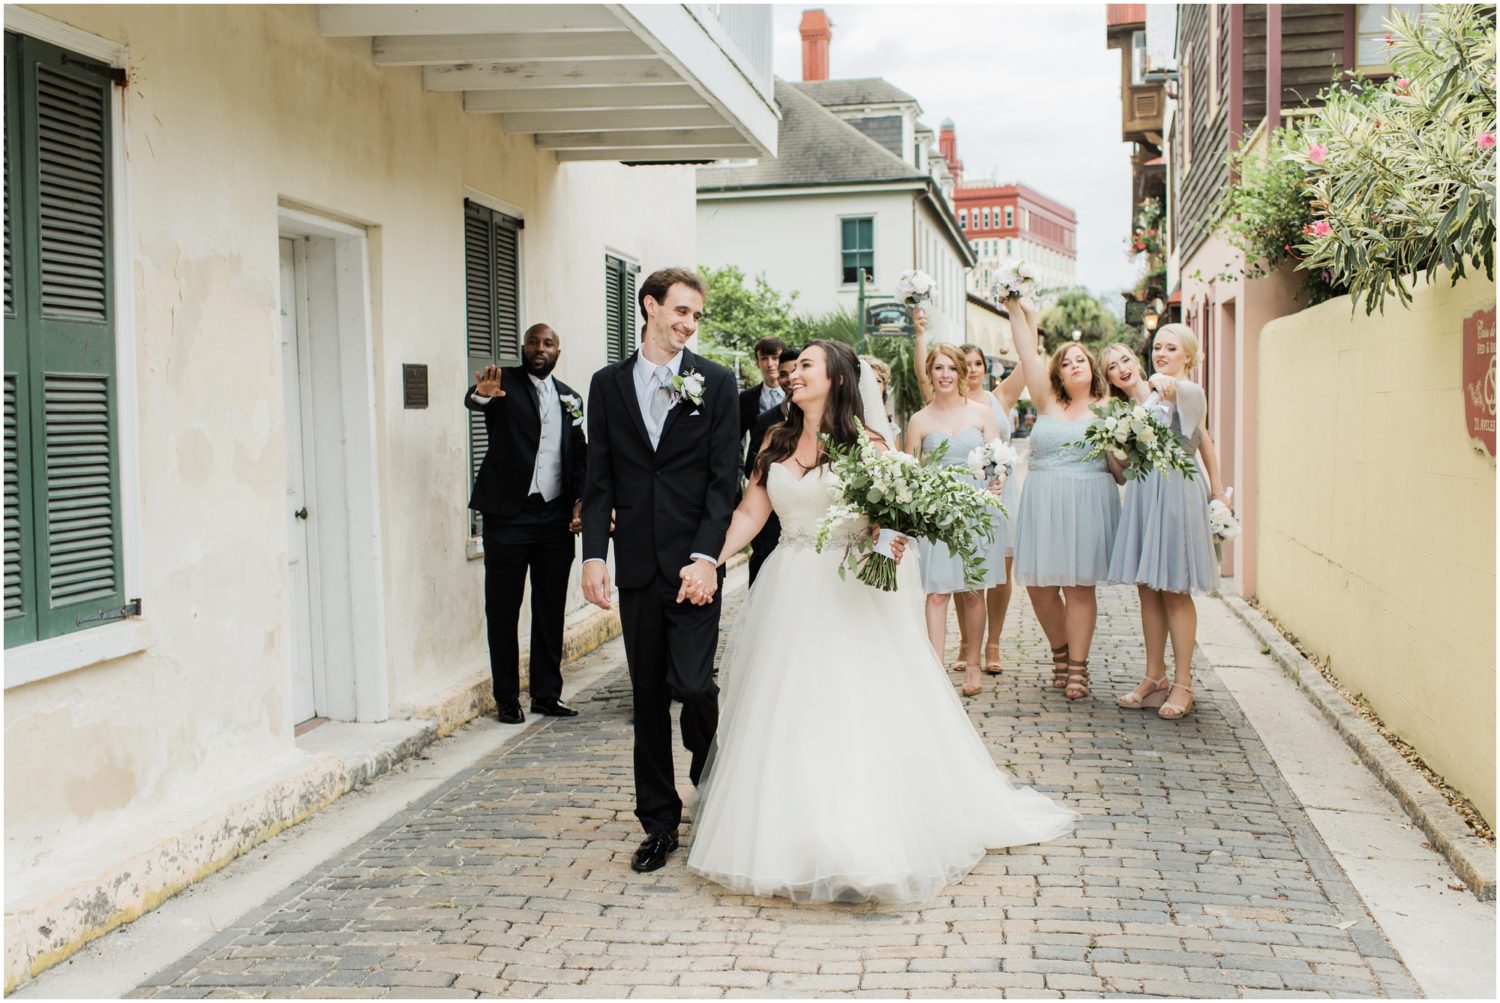 St. Augustine Wedding Photographers, Brooke Images, The White Room Loft, Downtown Saint Augustine Florida, Kathy and Kevin's Wedding